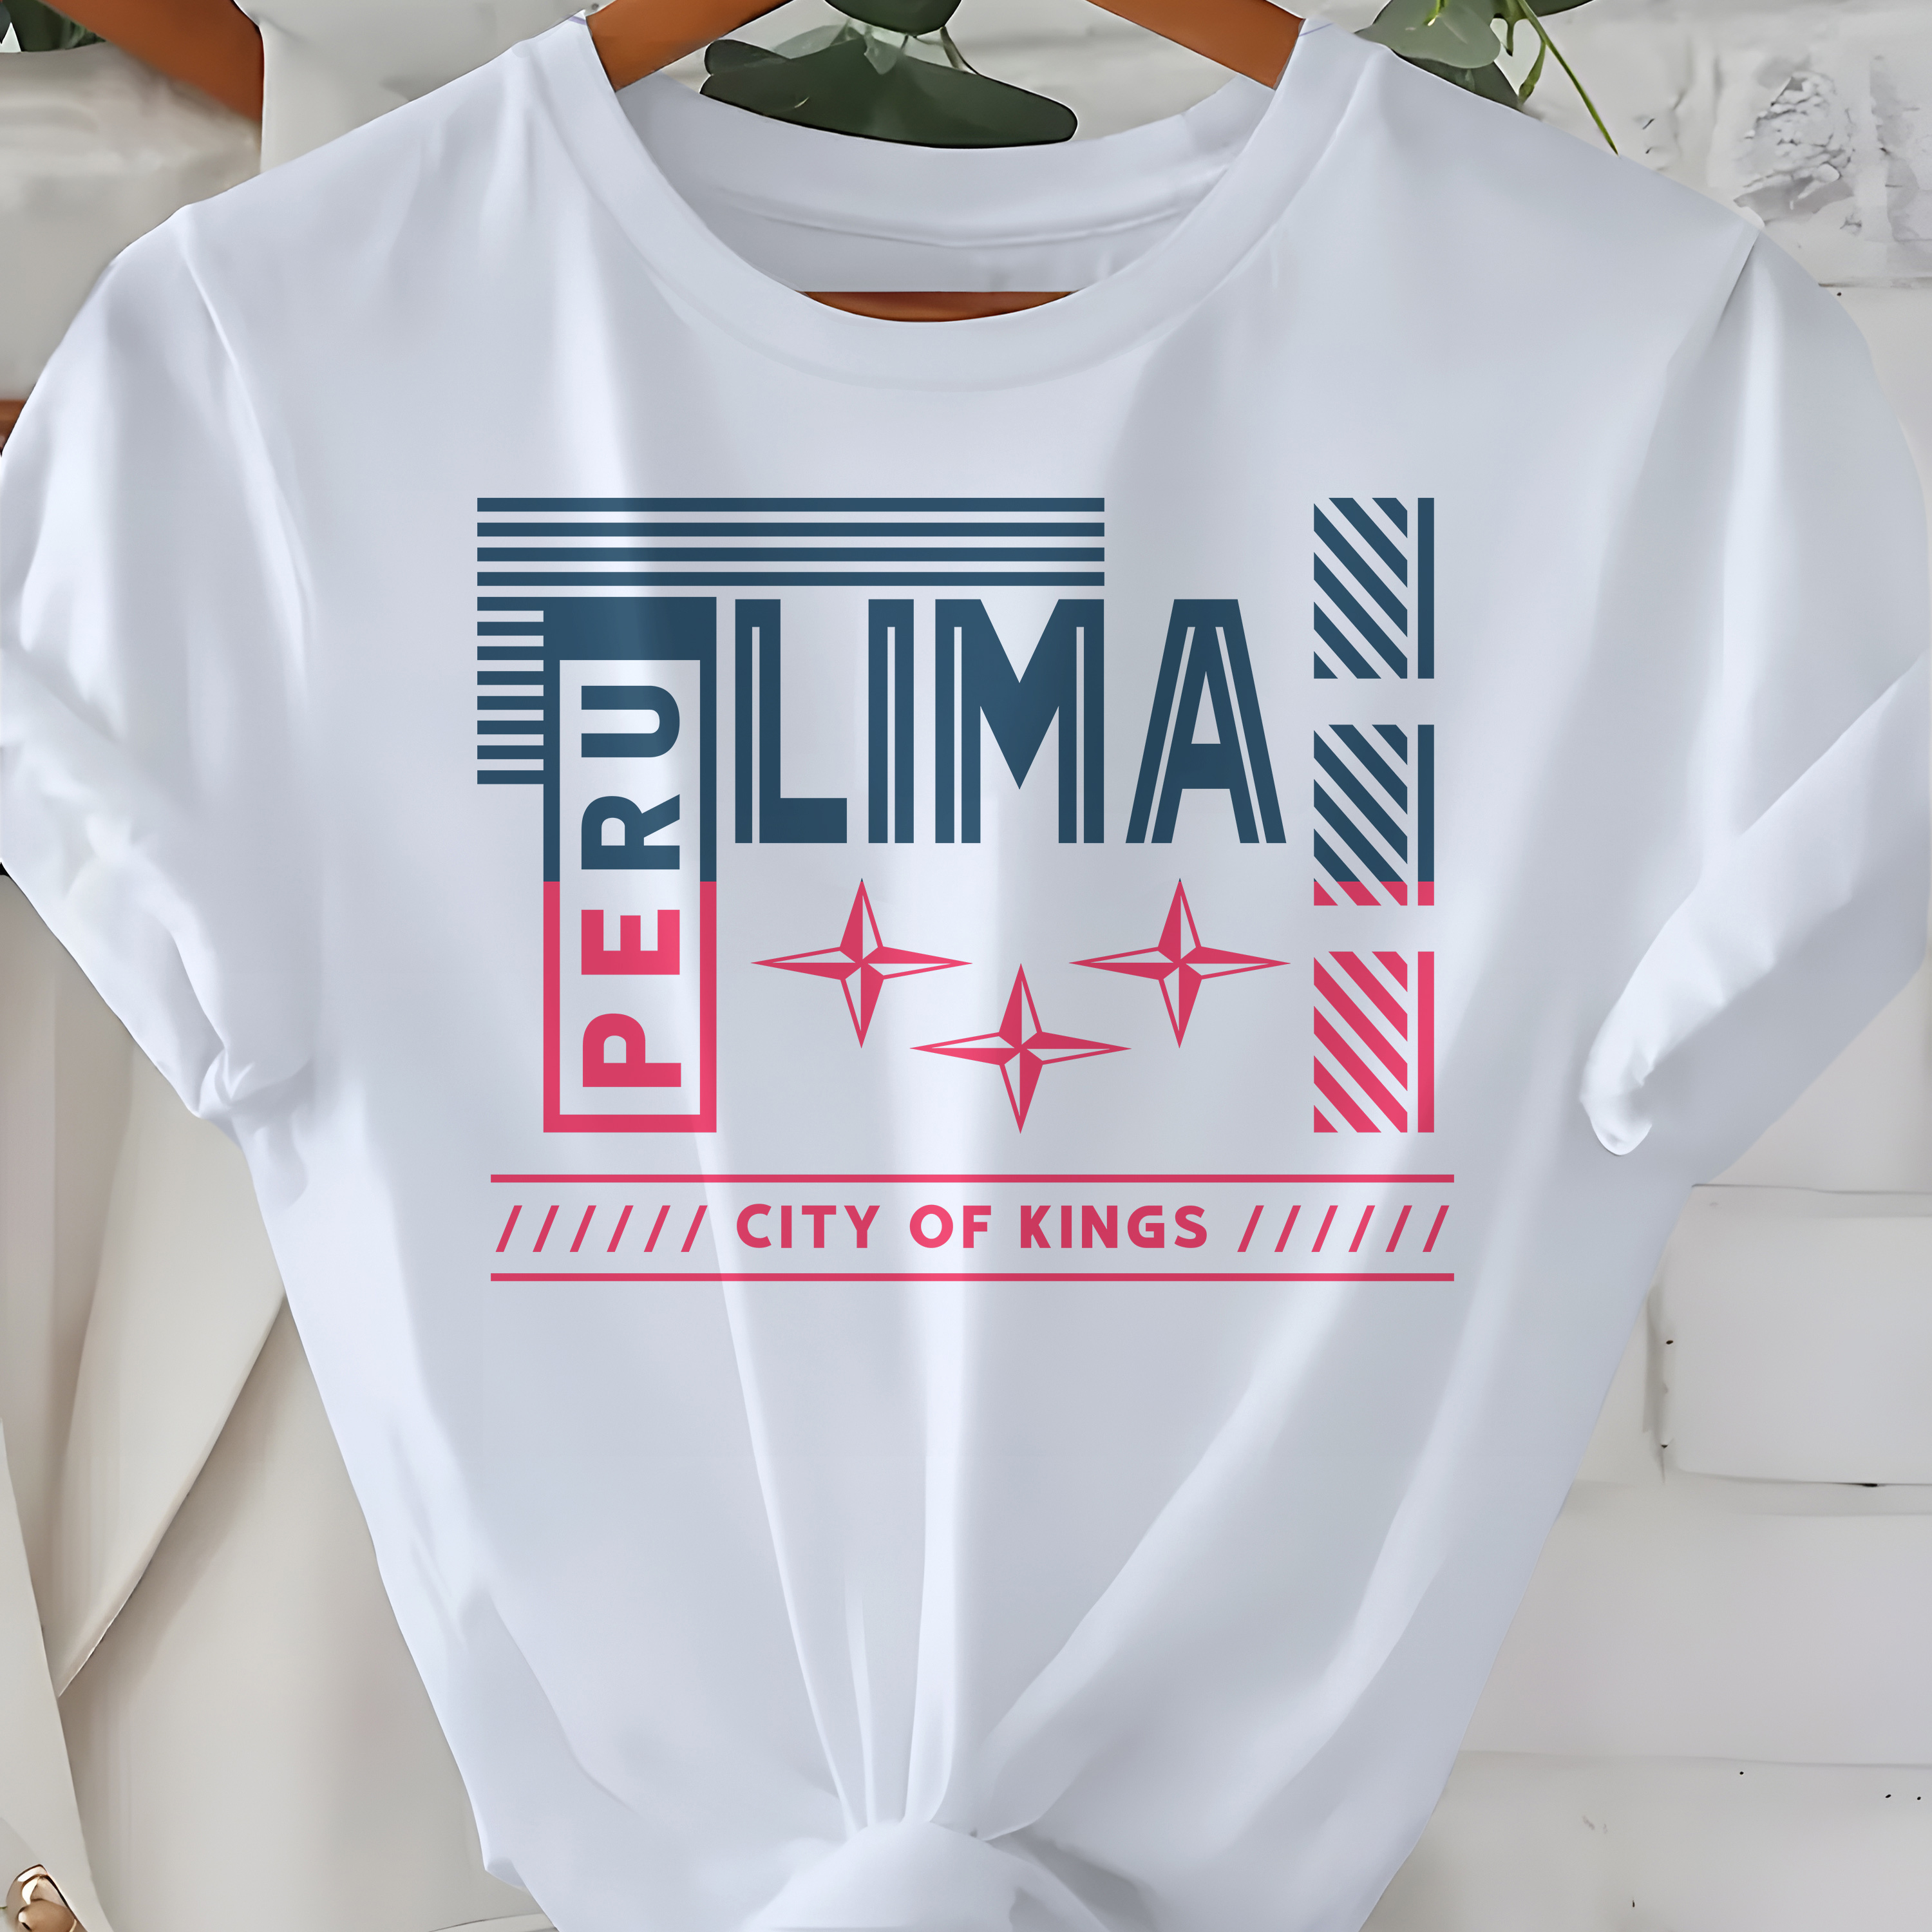 

Peru Lima City Of Kings City Name Graphic Print T-shirt, Short Sleeve Crew Neck Casual Top For Summer & Spring, Women's Clothing